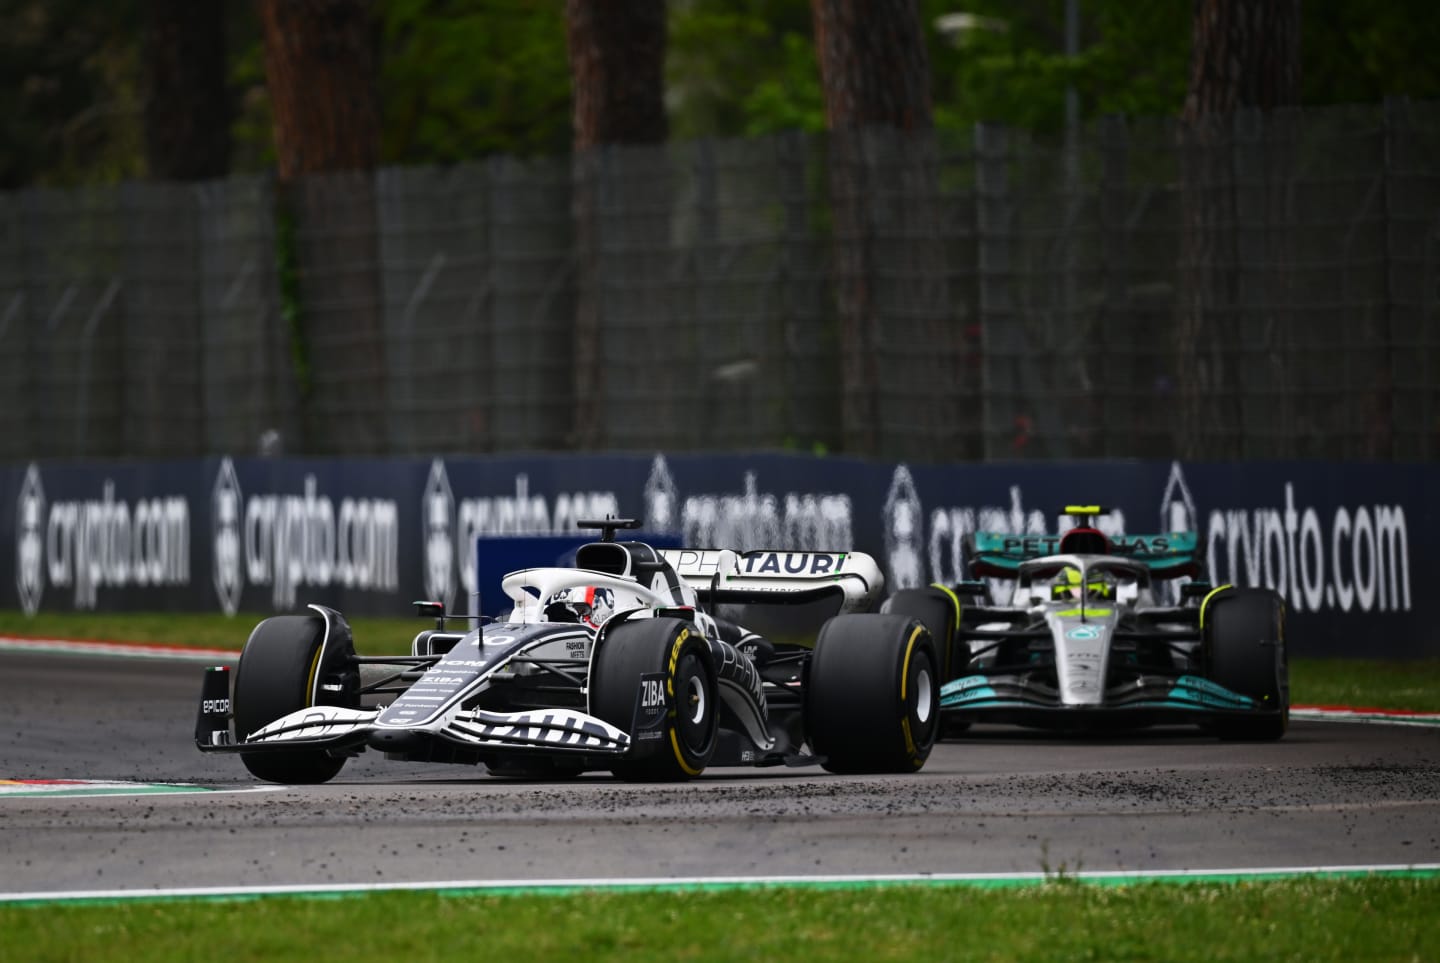 IMOLA, ITALY - APRIL 24: Pierre Gasly of France driving the (10) Scuderia AlphaTauri AT03 leads Lewis Hamilton of Great Britain driving the (44) Mercedes AMG Petronas F1 Team W13 during the F1 Grand Prix of Emilia Romagna at Autodromo Enzo e Dino Ferrari on April 24, 2022 in Imola, Italy. (Photo by Clive Mason/Getty Images)